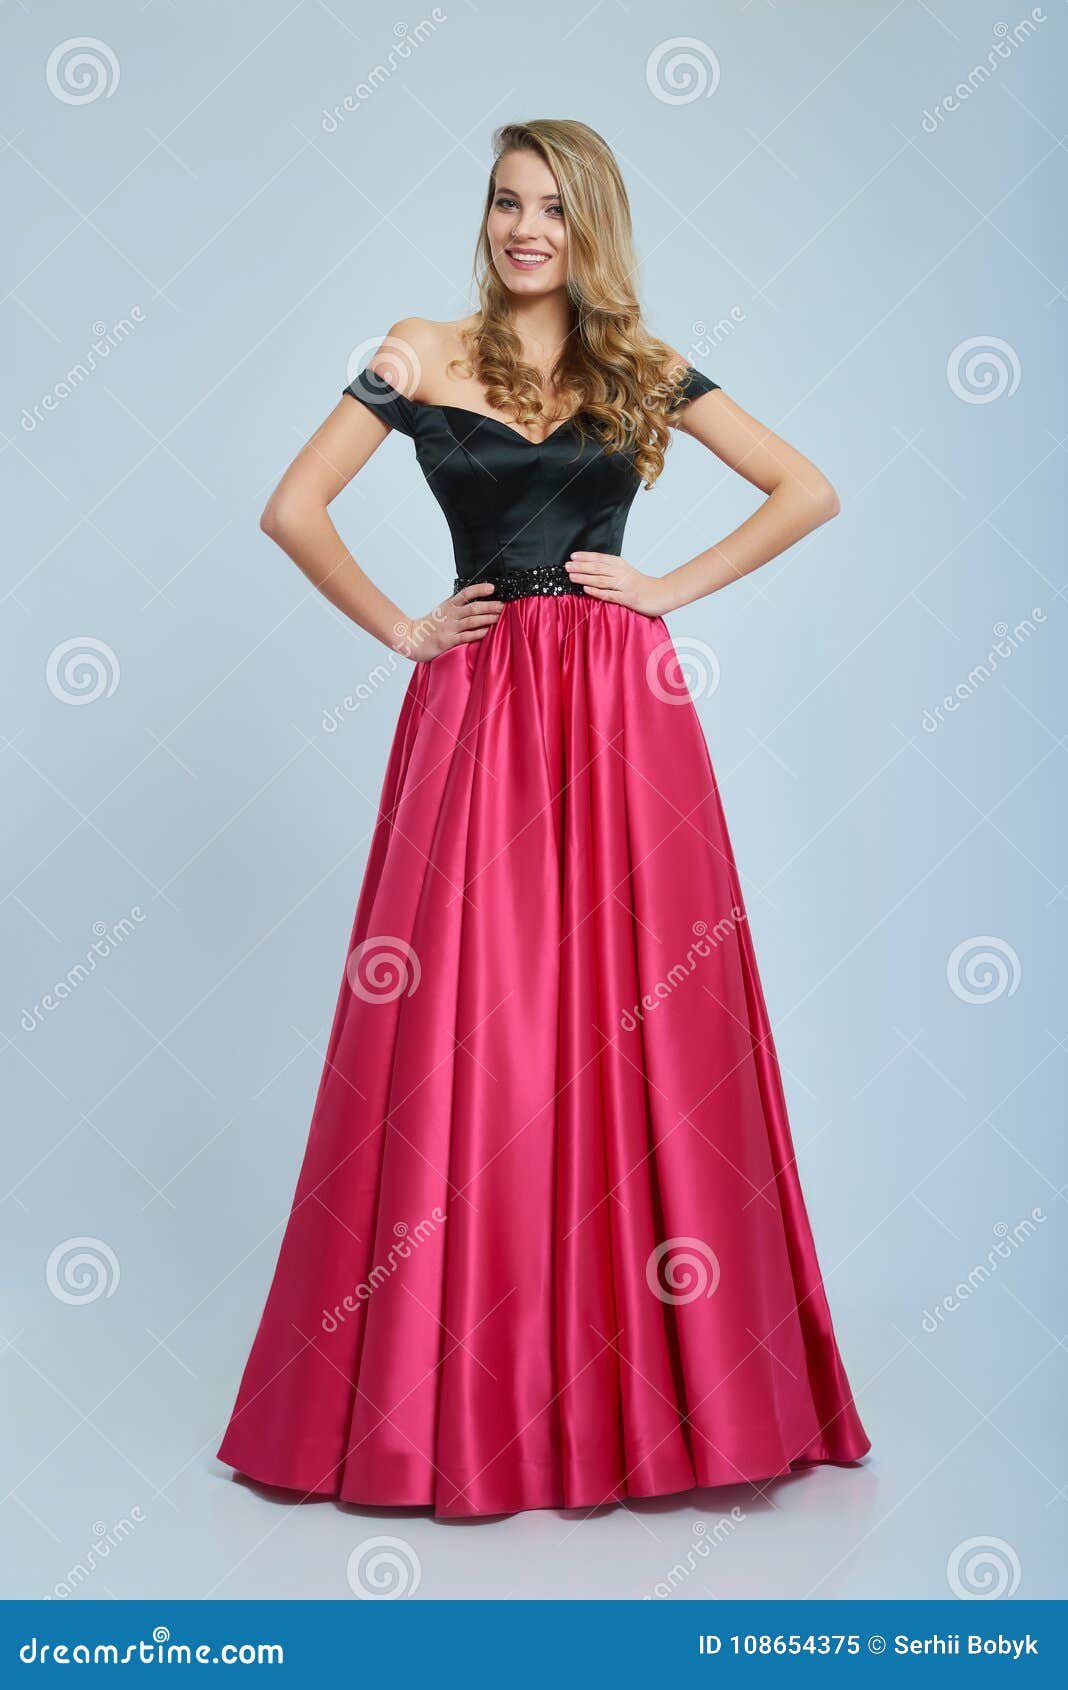 720+ Luxurious Good Looking Woman In Dress With Sequins And Jewels Stock  Photos, Pictures & Royalty-Free Images - iStock